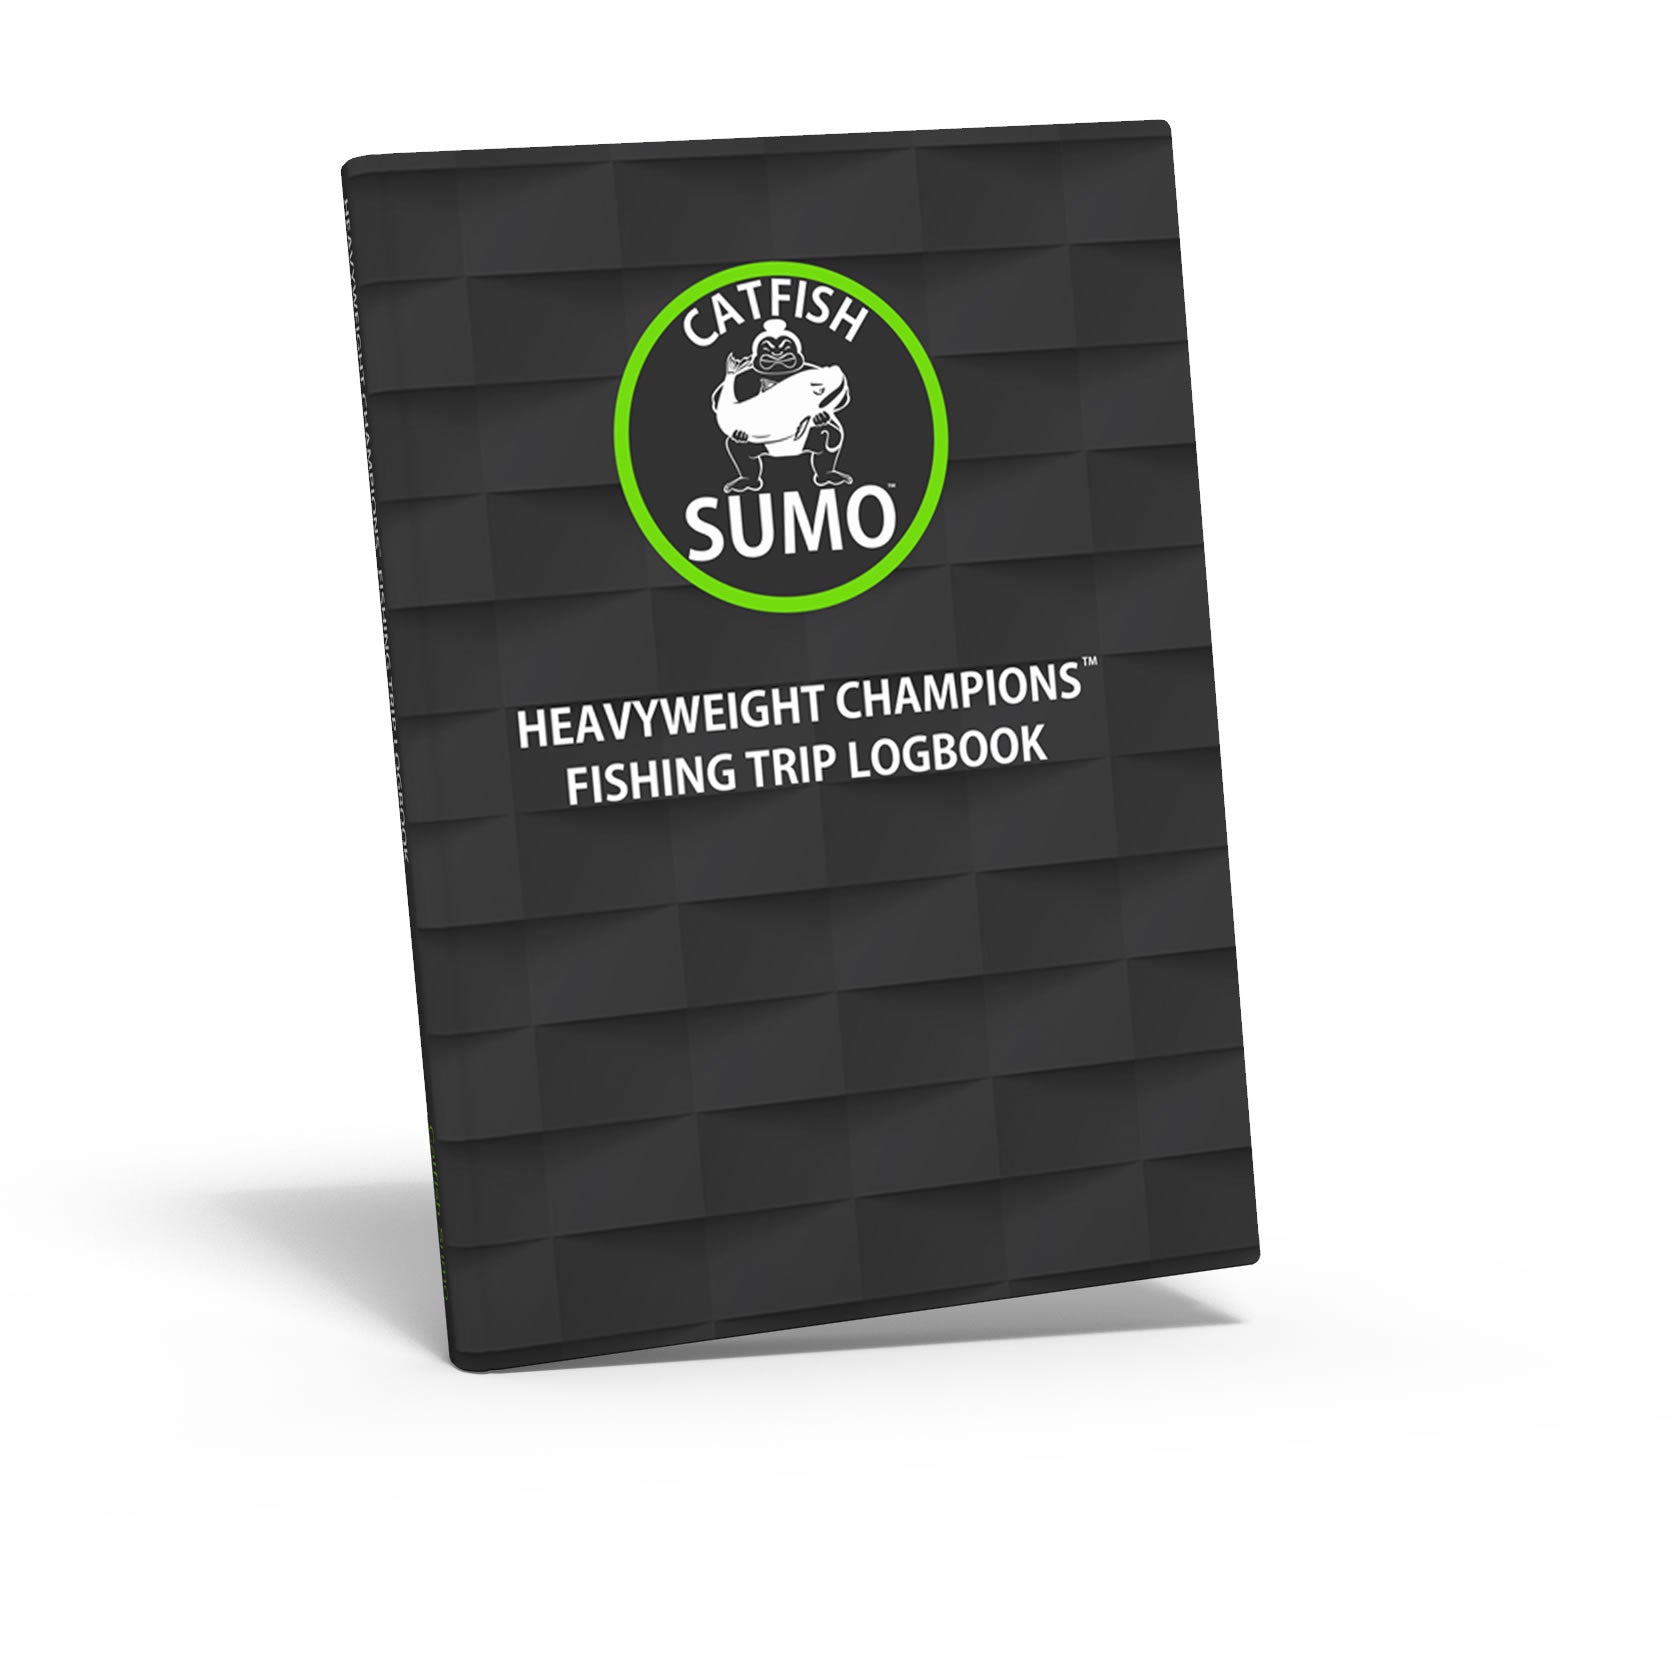 Fishing Loog Book: Notebook For The Serious Fisherman To Record Fishing  Trip Experiences, Fishing Trip Log Book, Fishing Trip Essentials Record  Book  Log Book